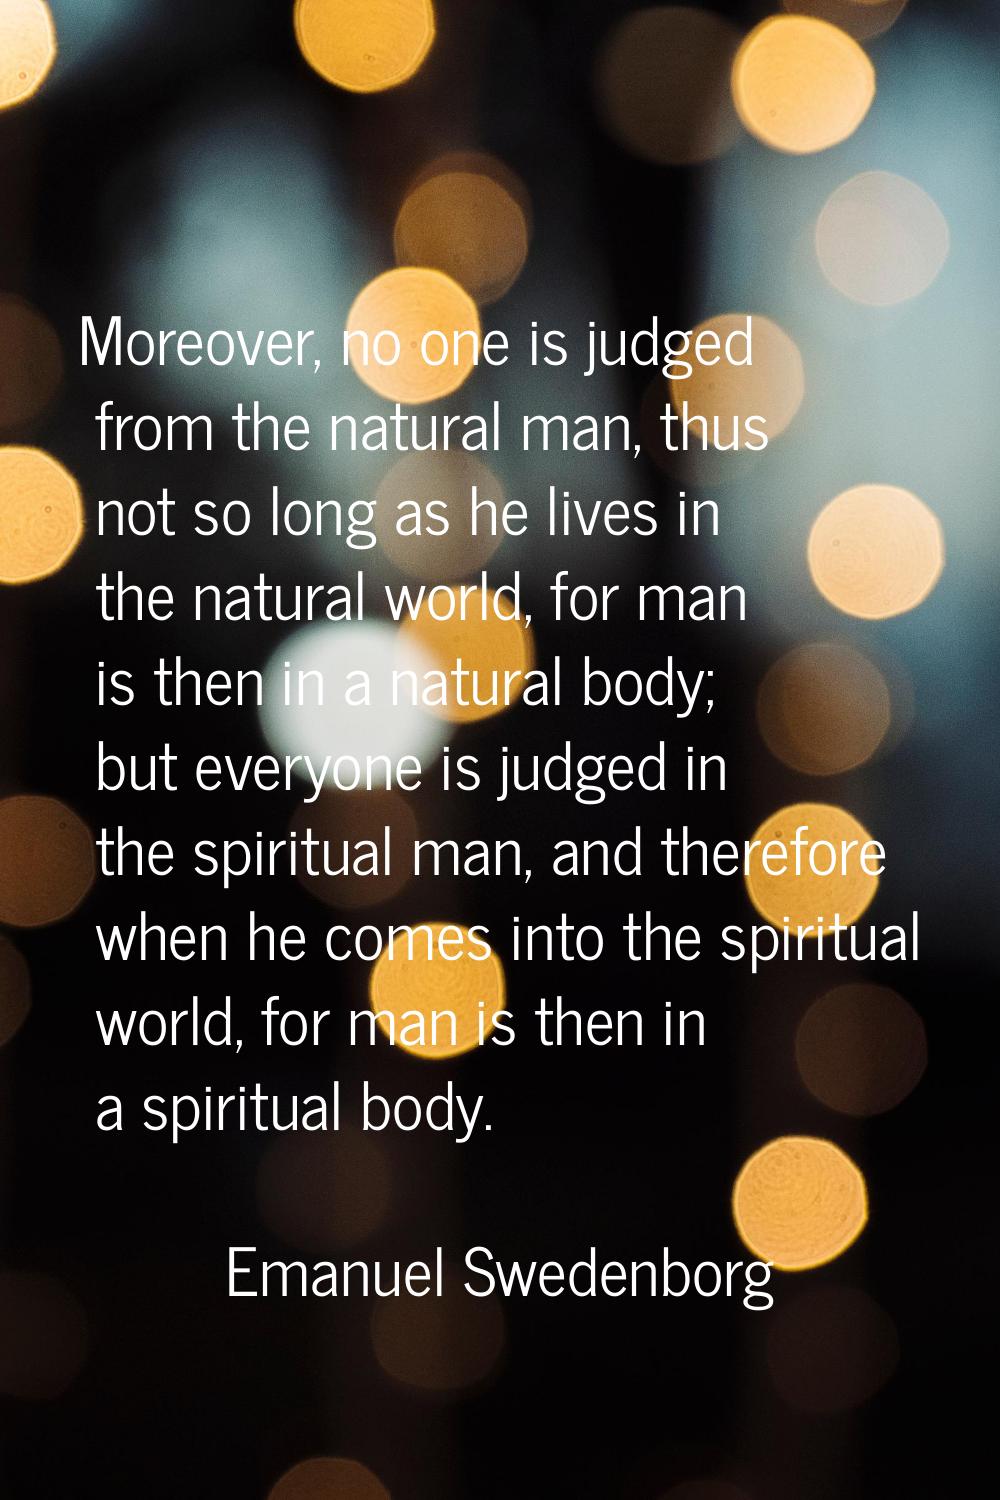 Moreover, no one is judged from the natural man, thus not so long as he lives in the natural world,